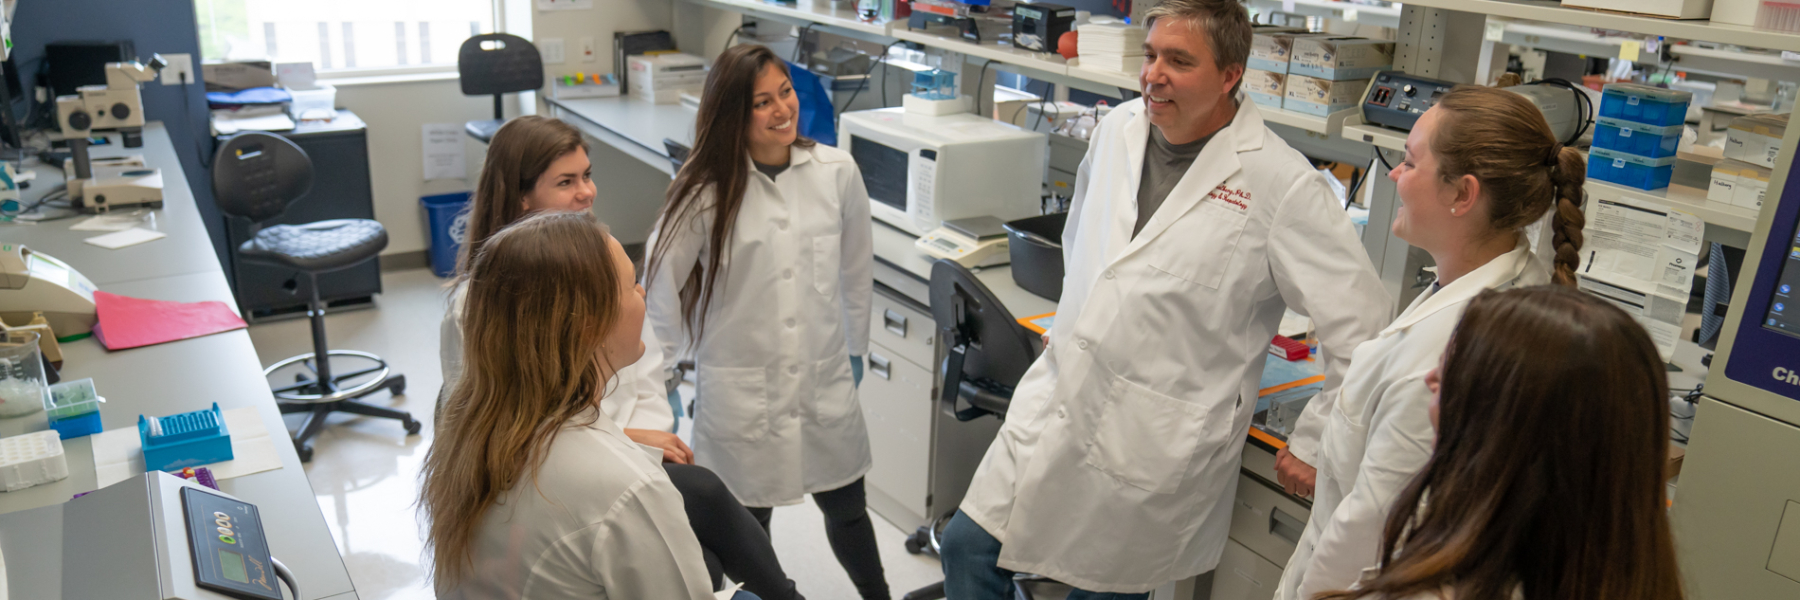 Dr. Richard Halberg in the lab with his research team